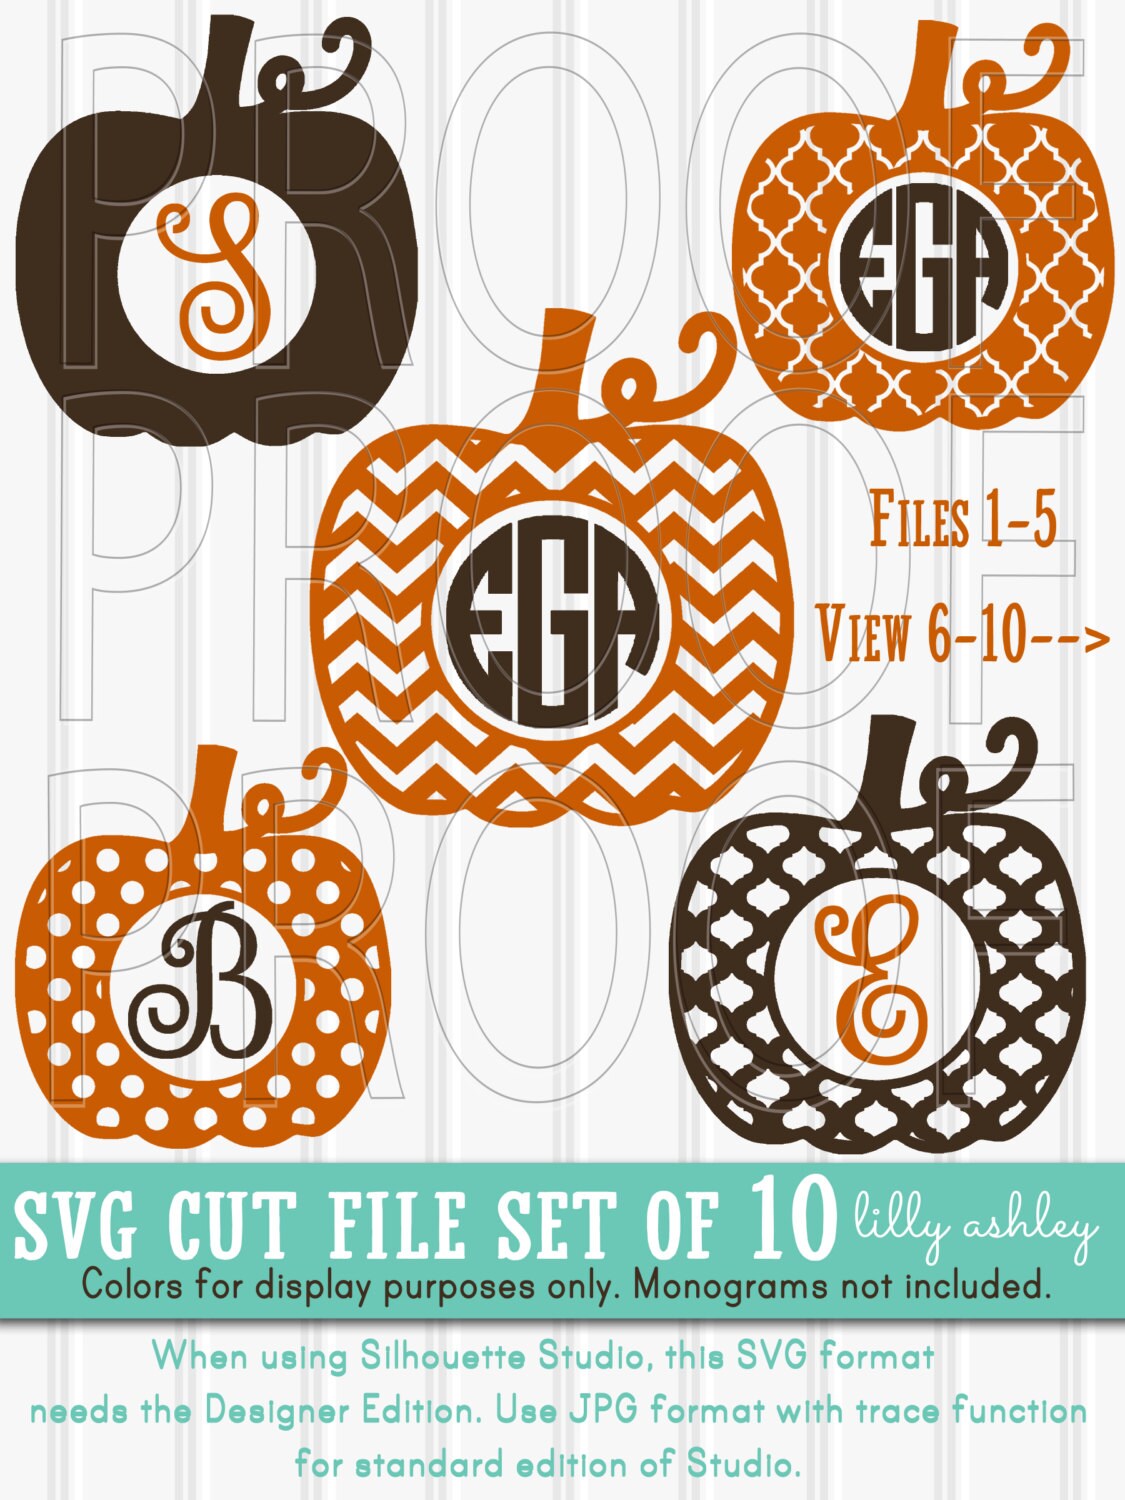 Download Monogram SVG Files Set of 10 cutting files includes